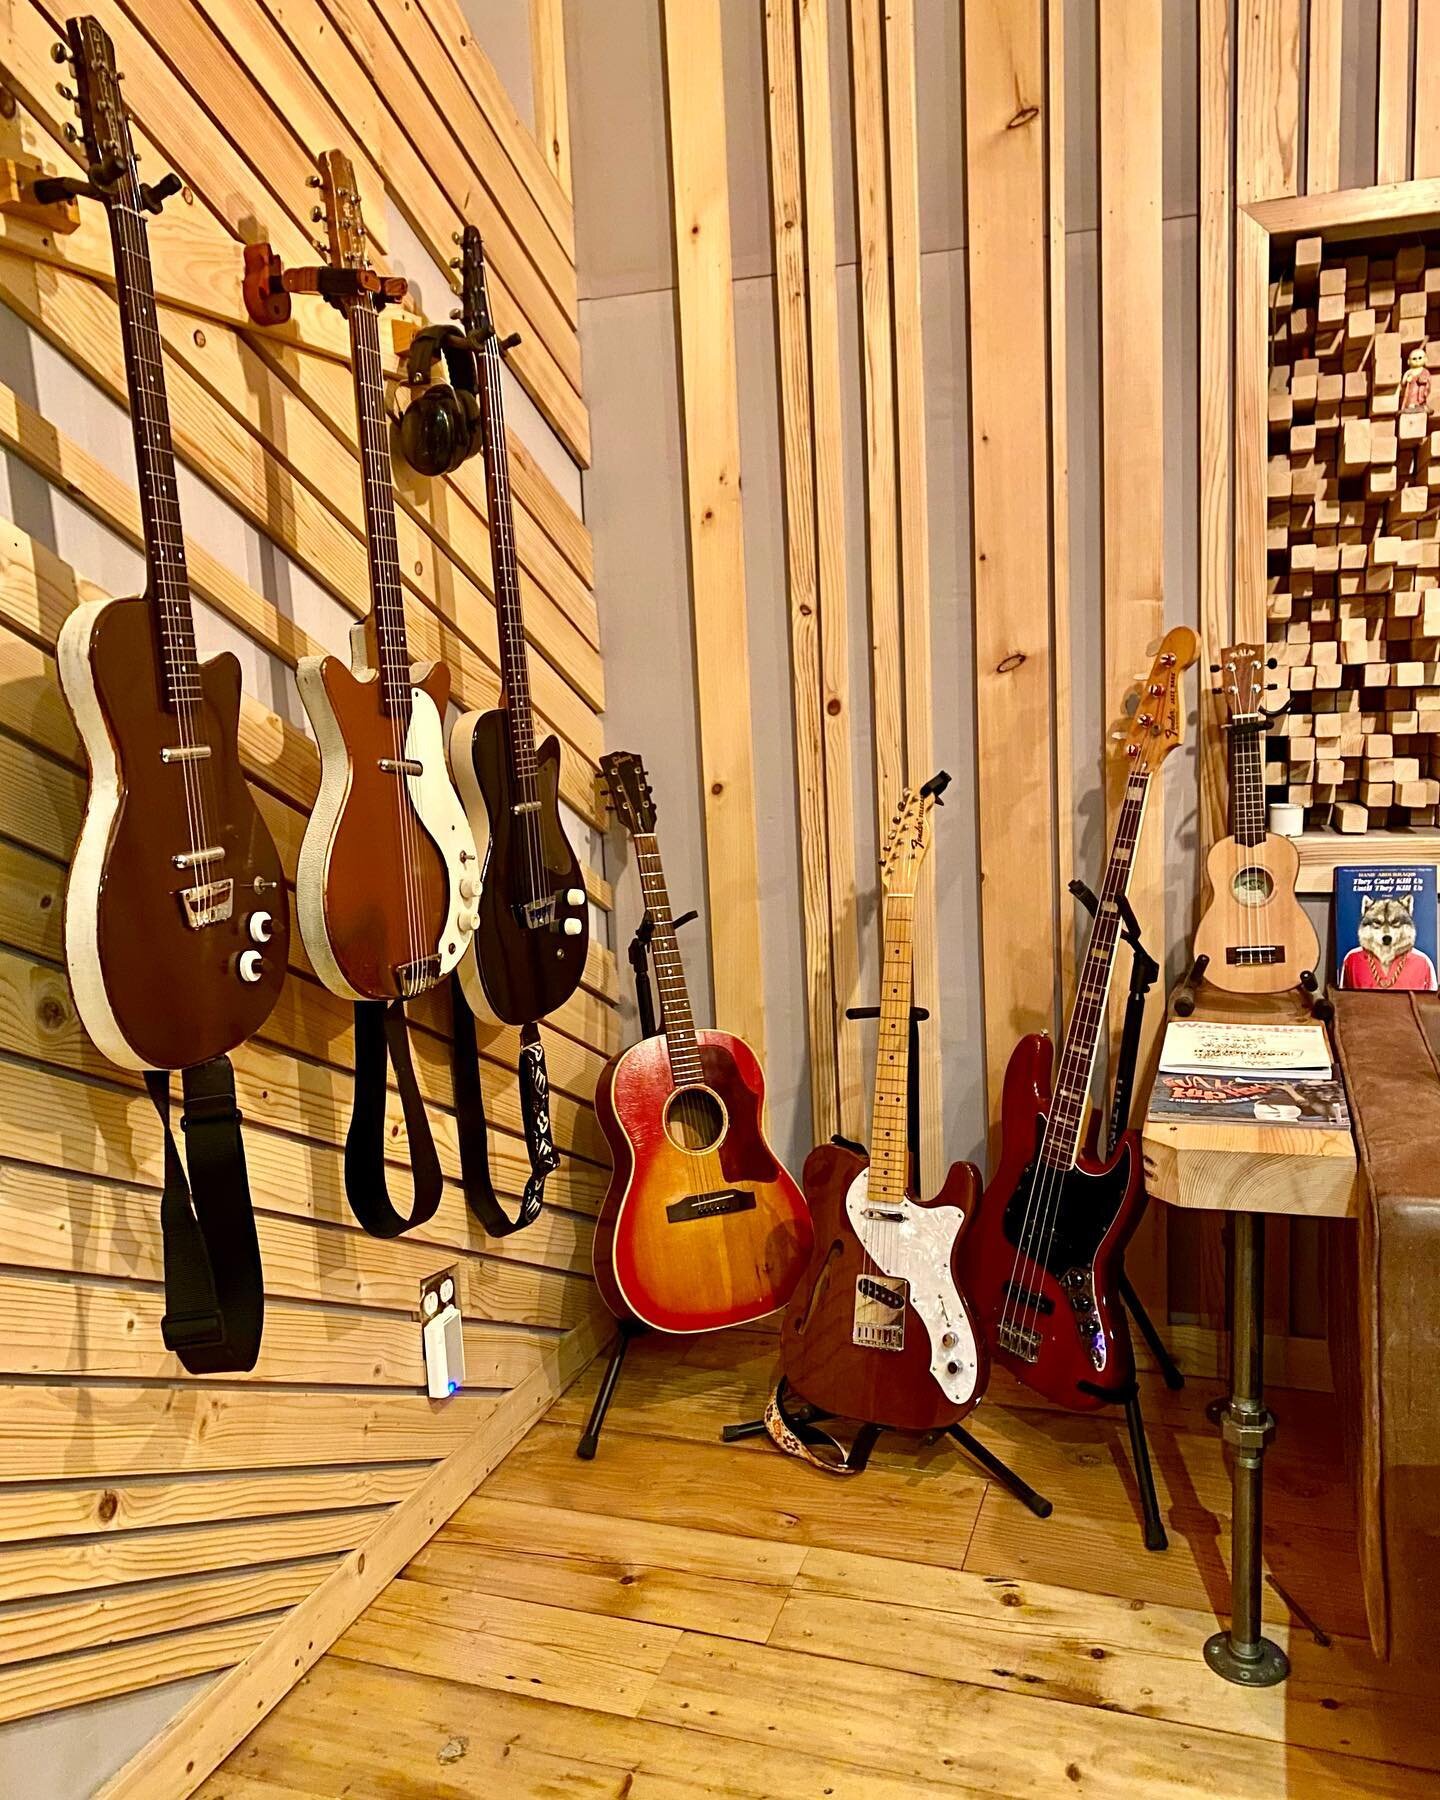 CONTEST ALERT! 
Have you seen our new guitar nook? Conveniently located in the control room and ready for those unexpected inspirations. FREE Bridge Studio merch to whoever can name the most instruments (extra credit for more detail). 

This Bridge S